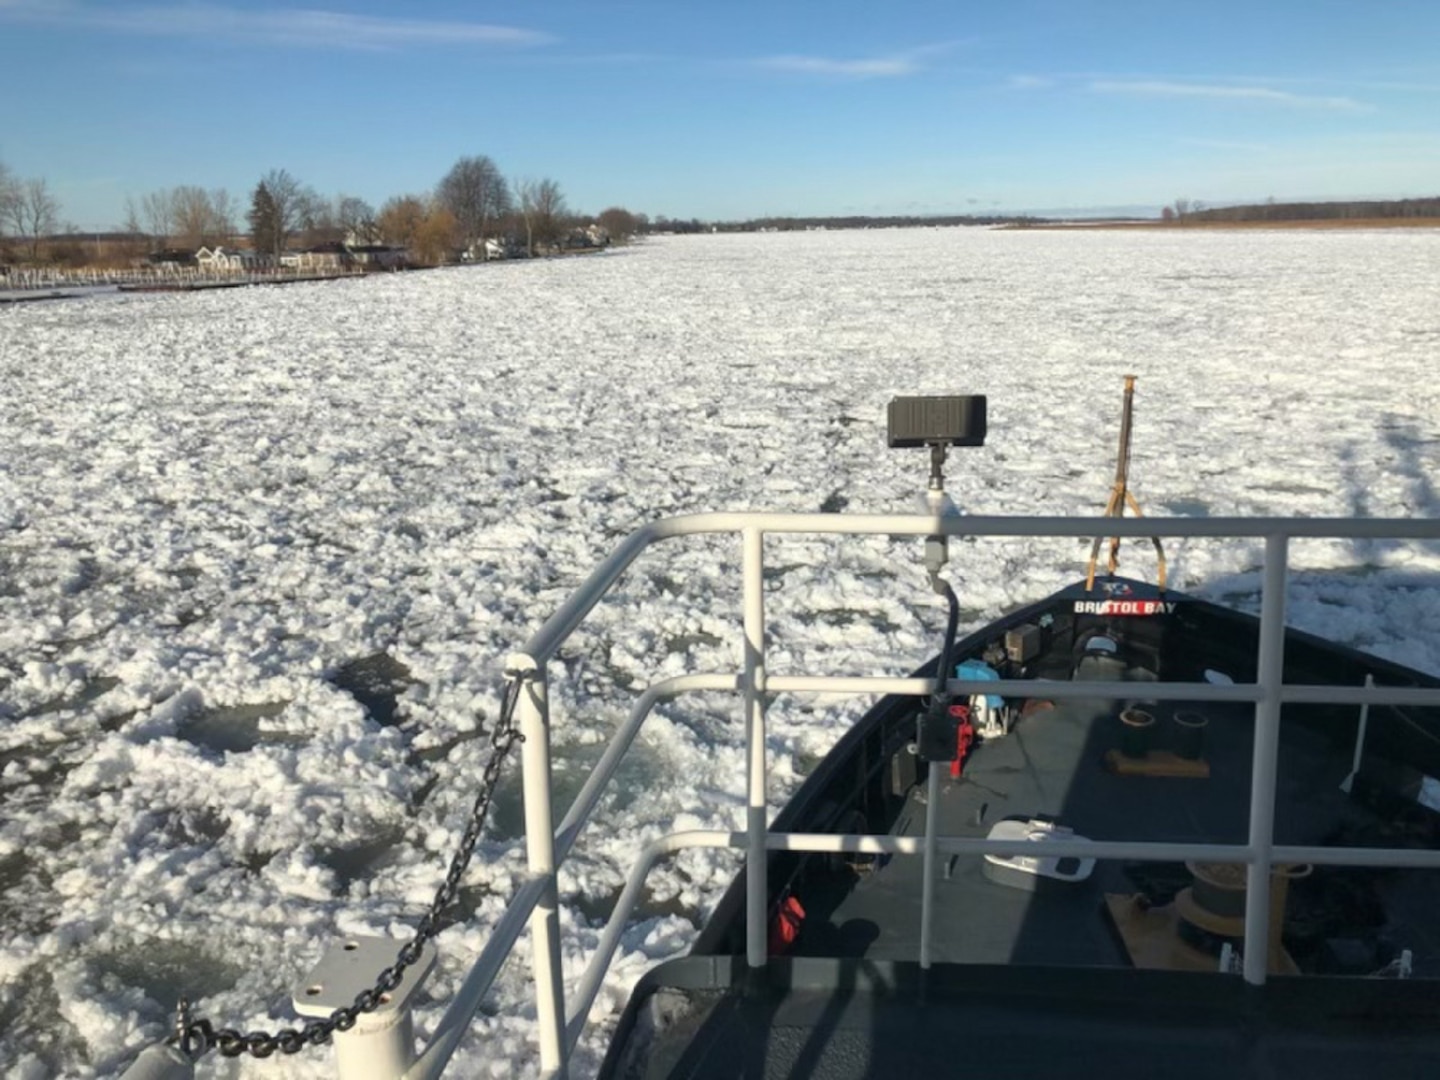 Coast Guard Cutter Morro Bay cuts through ice on February 10, 2021 on the St. Clair River in support of Operation Coal Shovel. Operation Coal Shovel is an annual domestic ice-breaking mission conducted on Lakes Huron, Ontario, Erie, St. Clair, the St. Clair/Detroit river system and St. Lawrence Seaway.

 Courtesy photo by Gary Baumgarten.